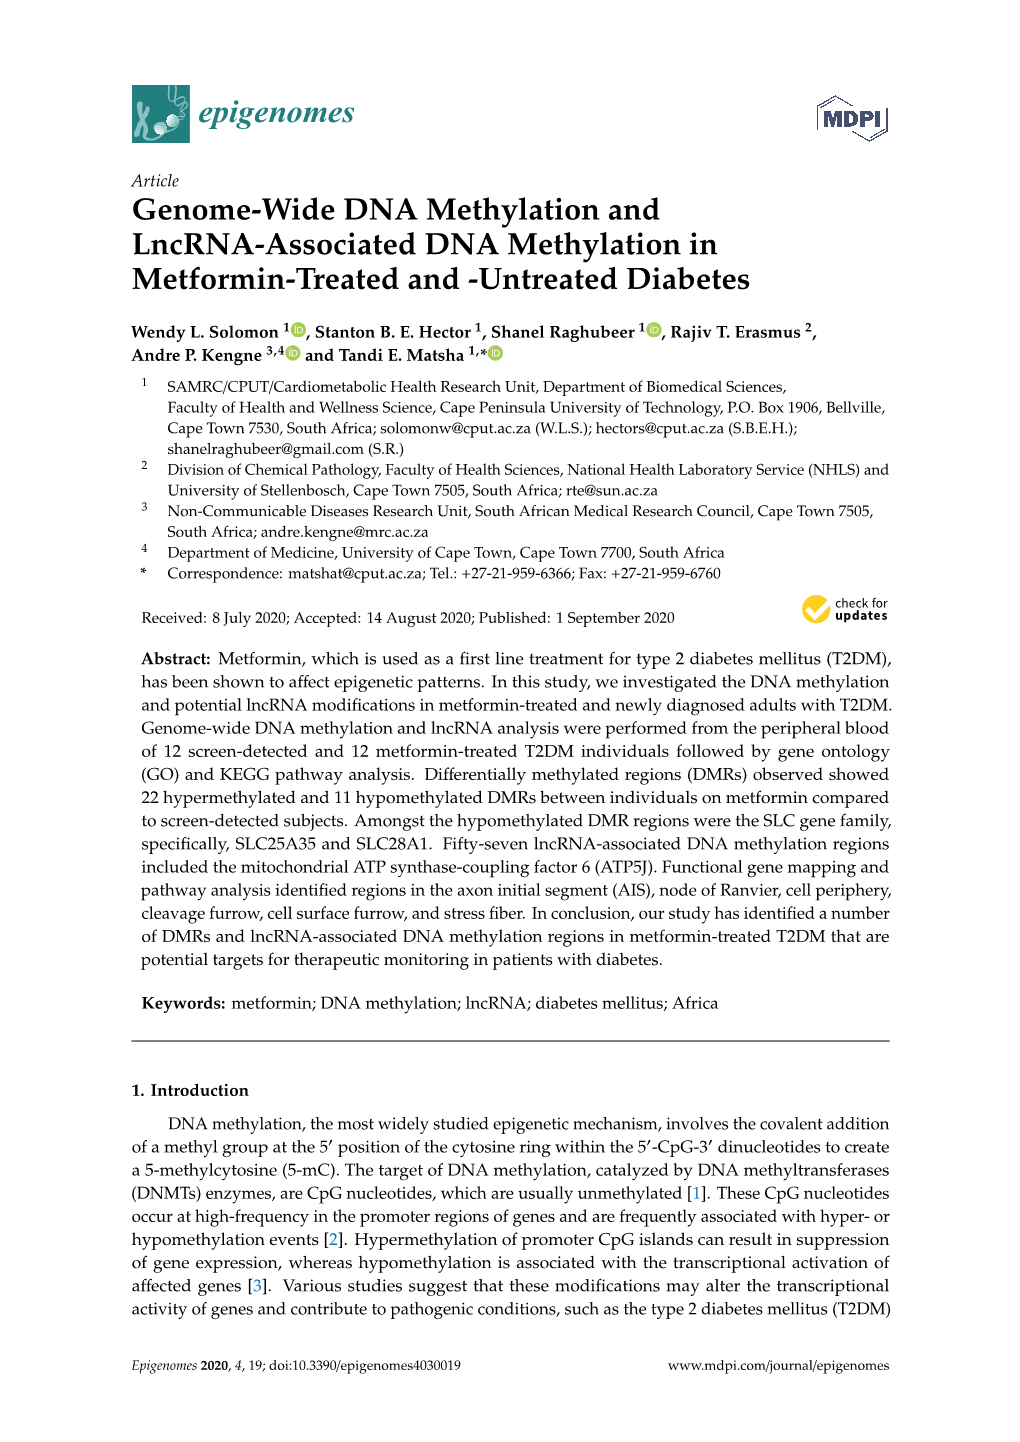 Genome-Wide DNA Methylation and Lncrna-Associated DNA Methylation in Metformin-Treated and -Untreated Diabetes